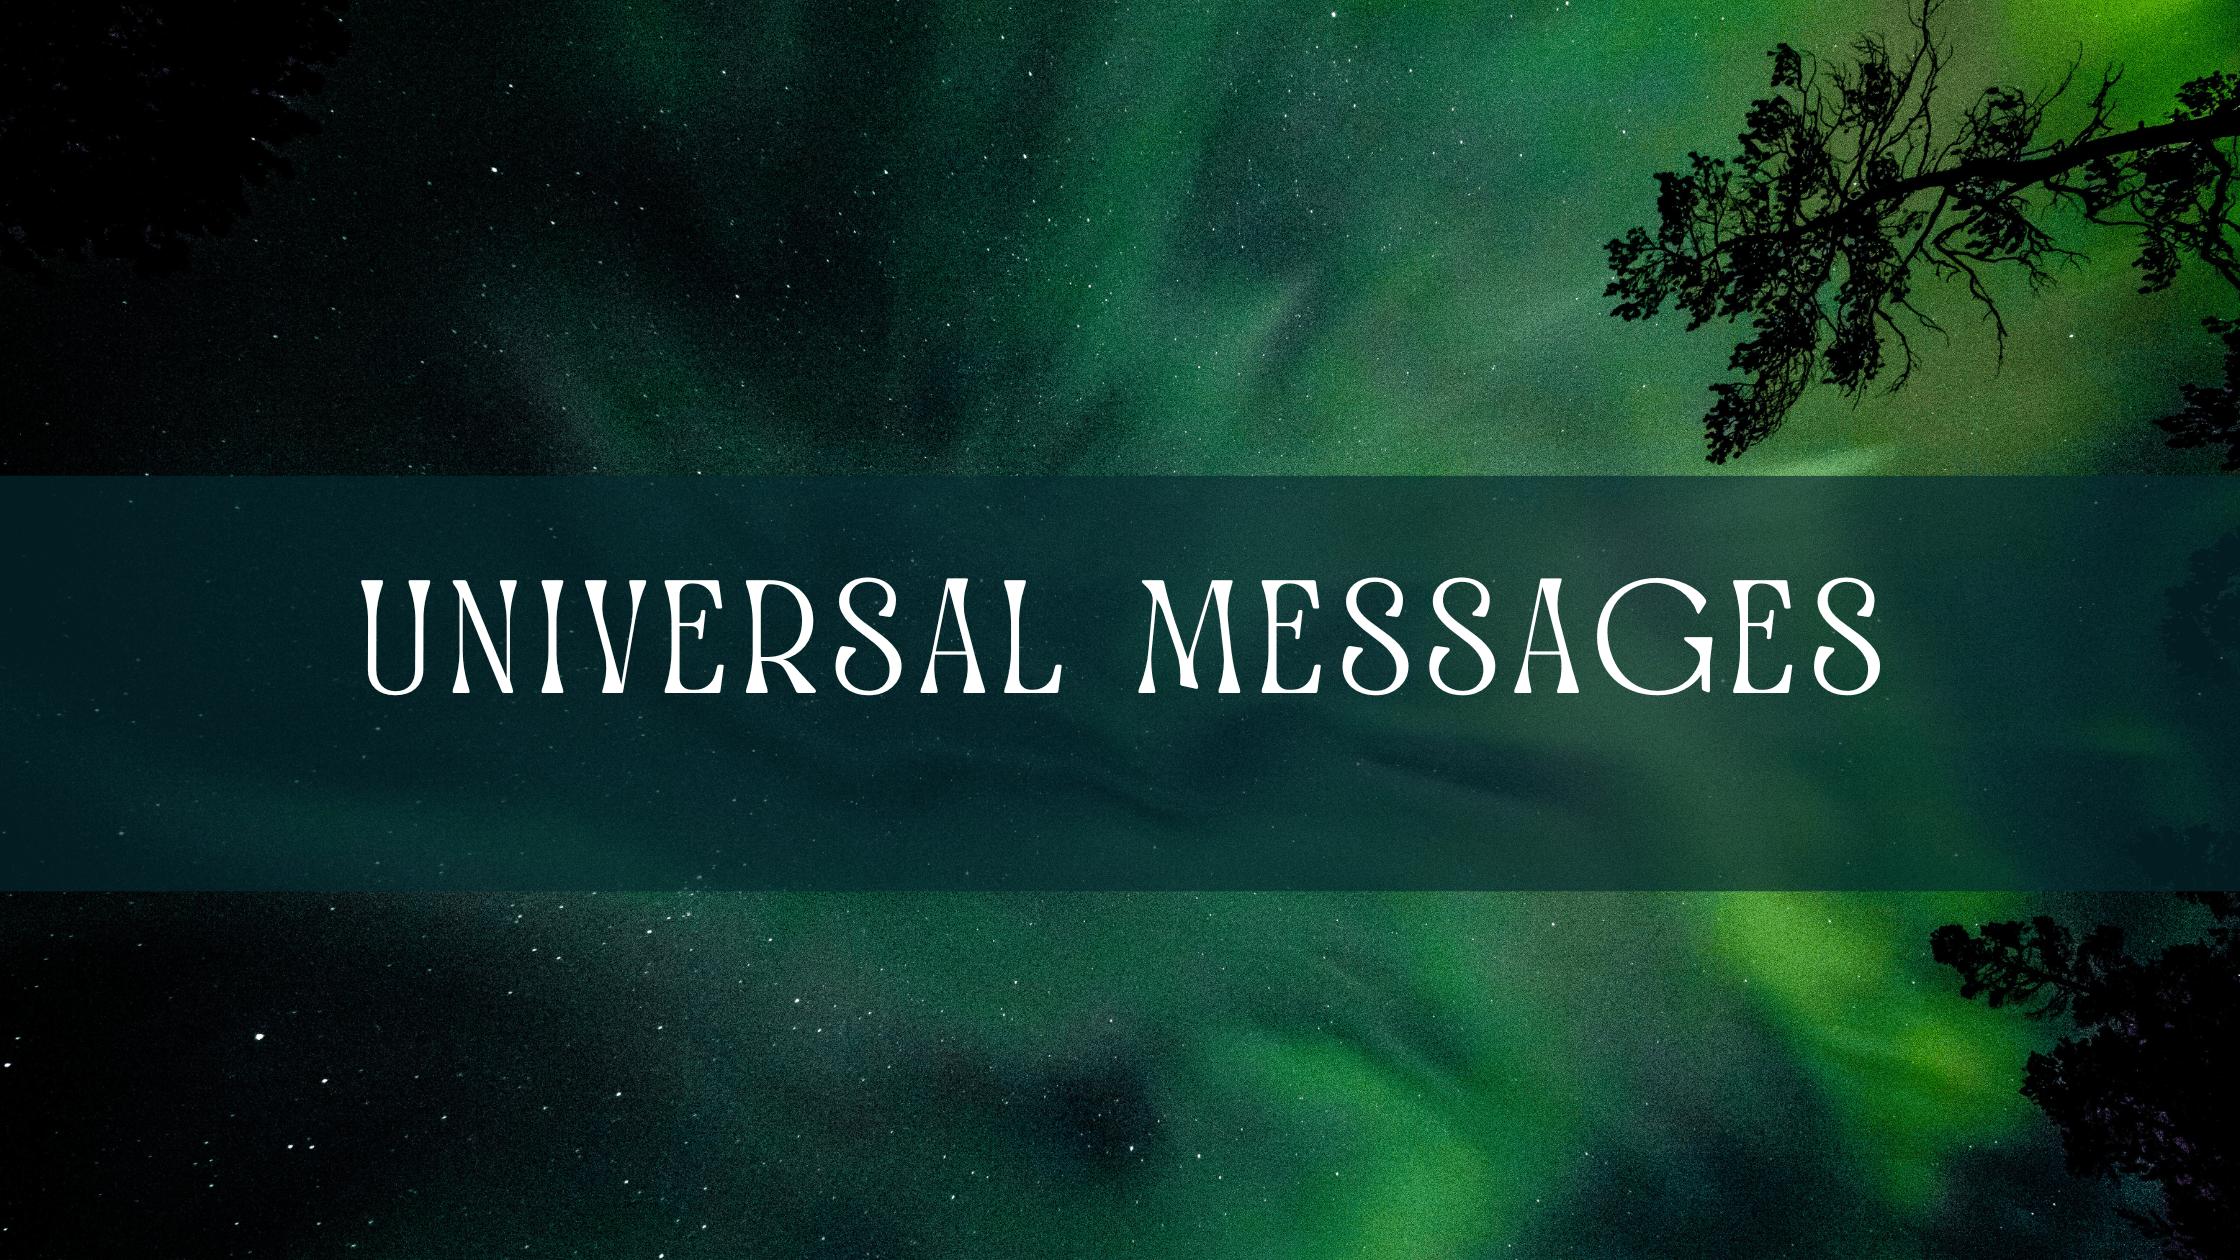 Universal Messages